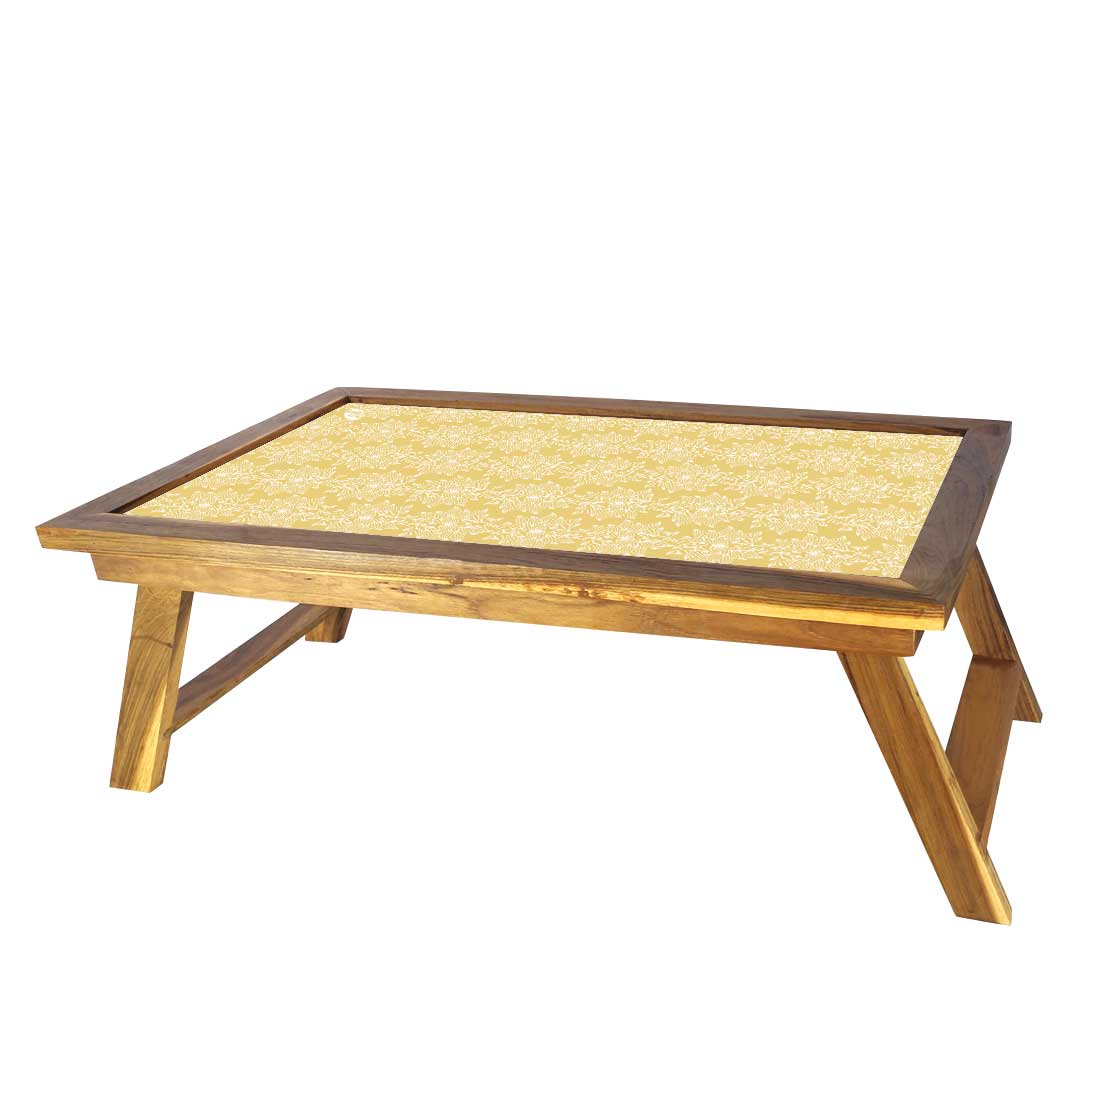 Foldable Bed Breakfast Table Long Eating Tray for Home - Yellow Flower Nutcase